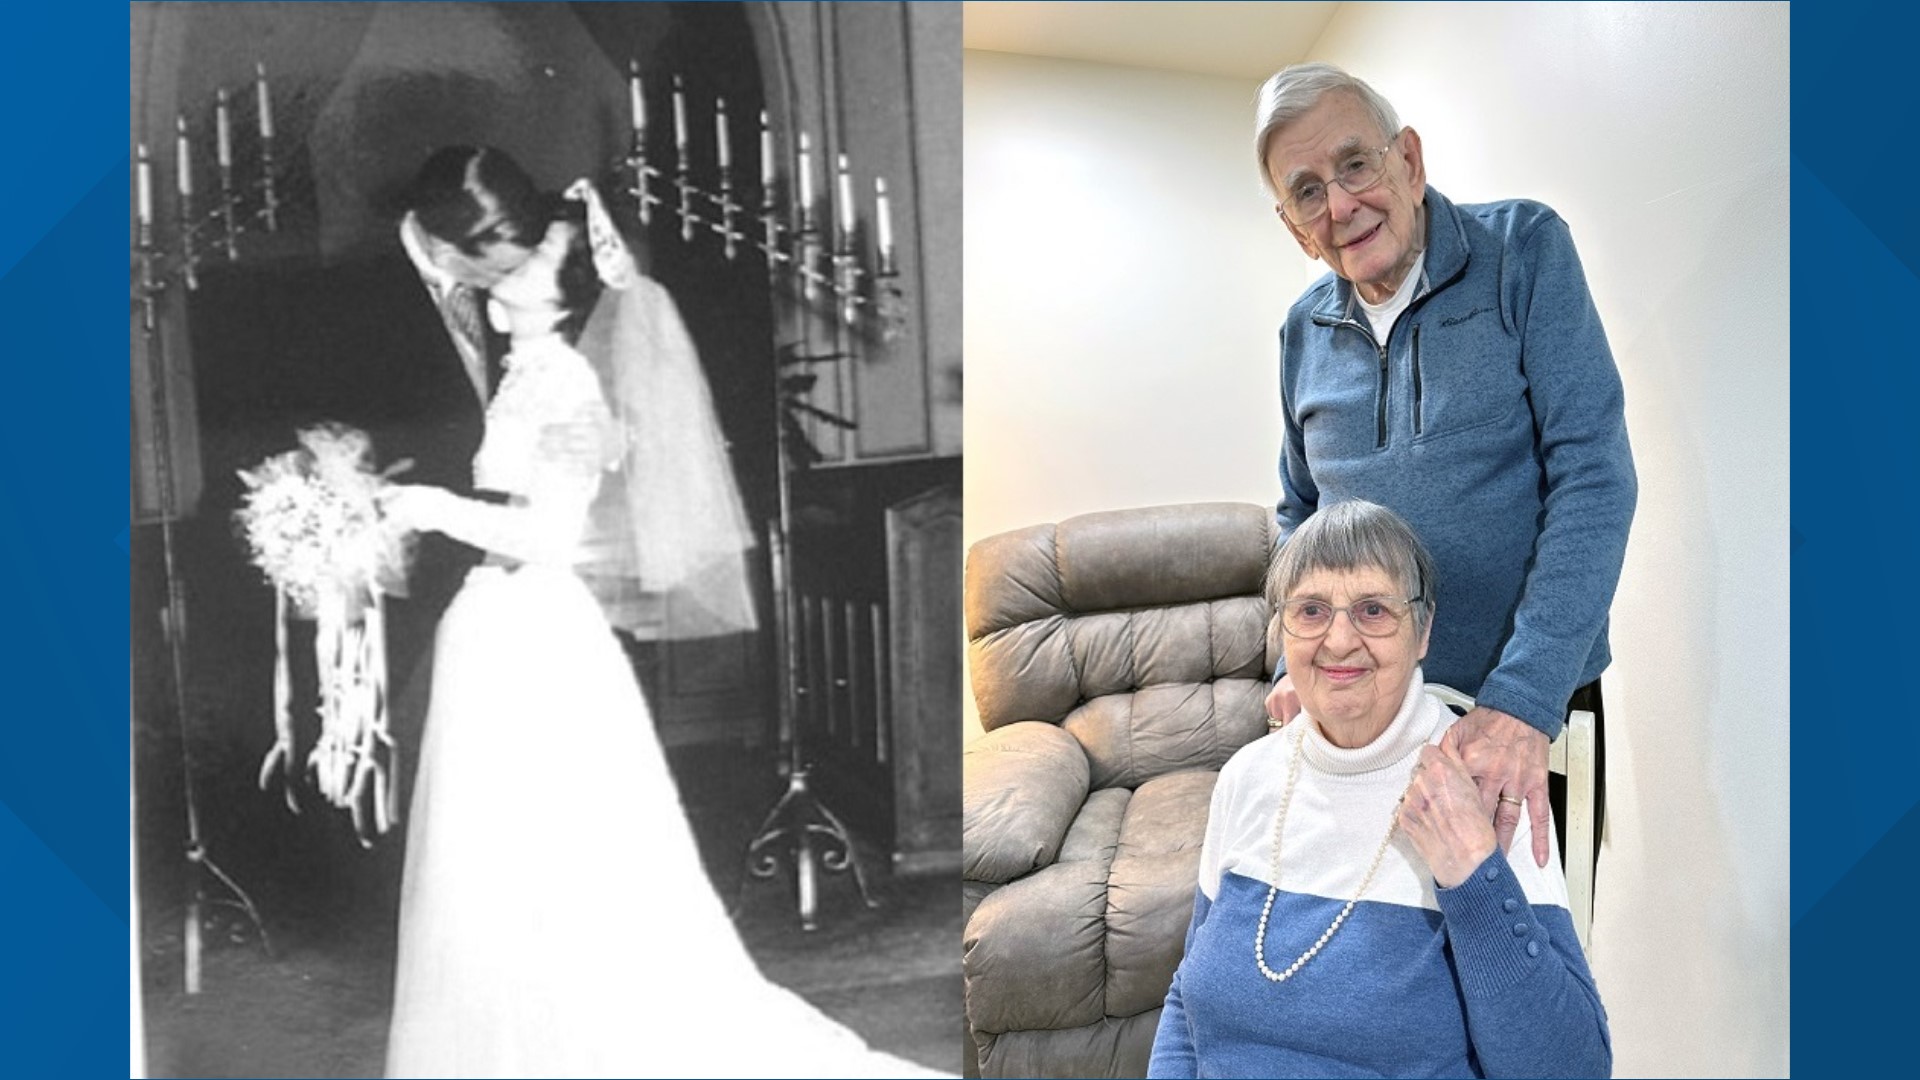 Clyde and Mimi Ross shared their love story ahead of spending their 72nd straight Valentine's Day together.